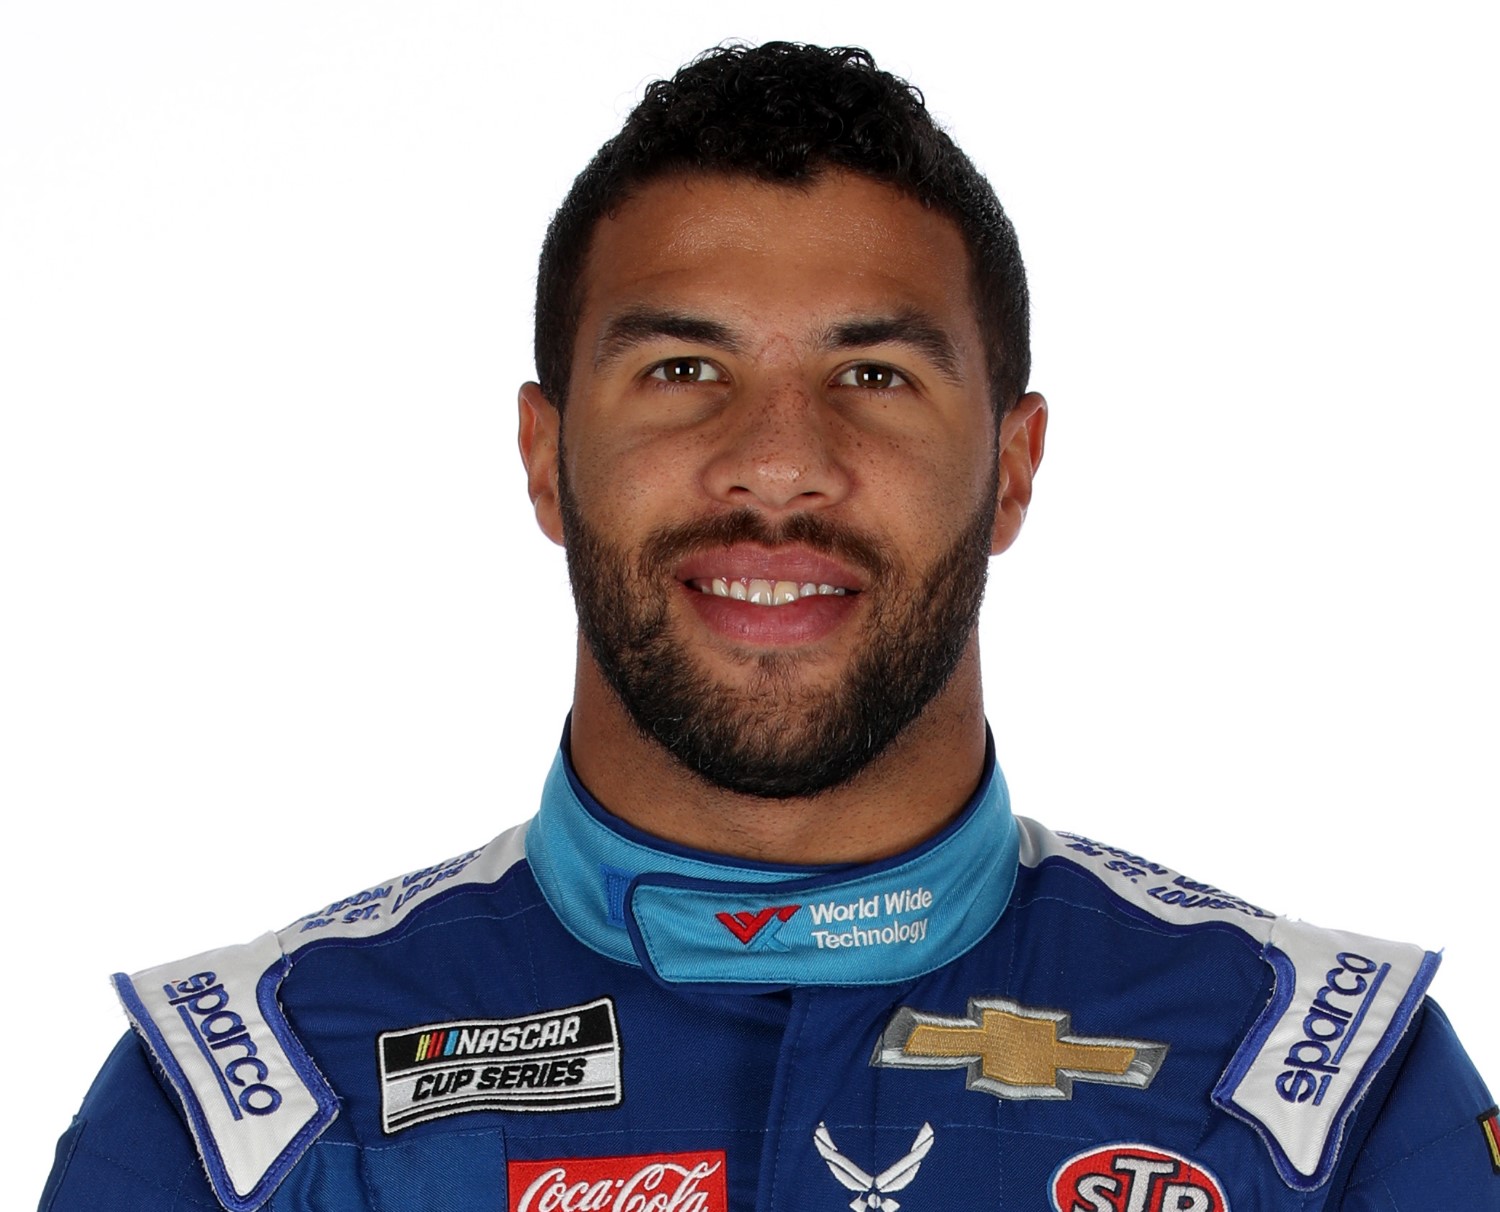 Bubba Wallace loses his cool, and his sponsor